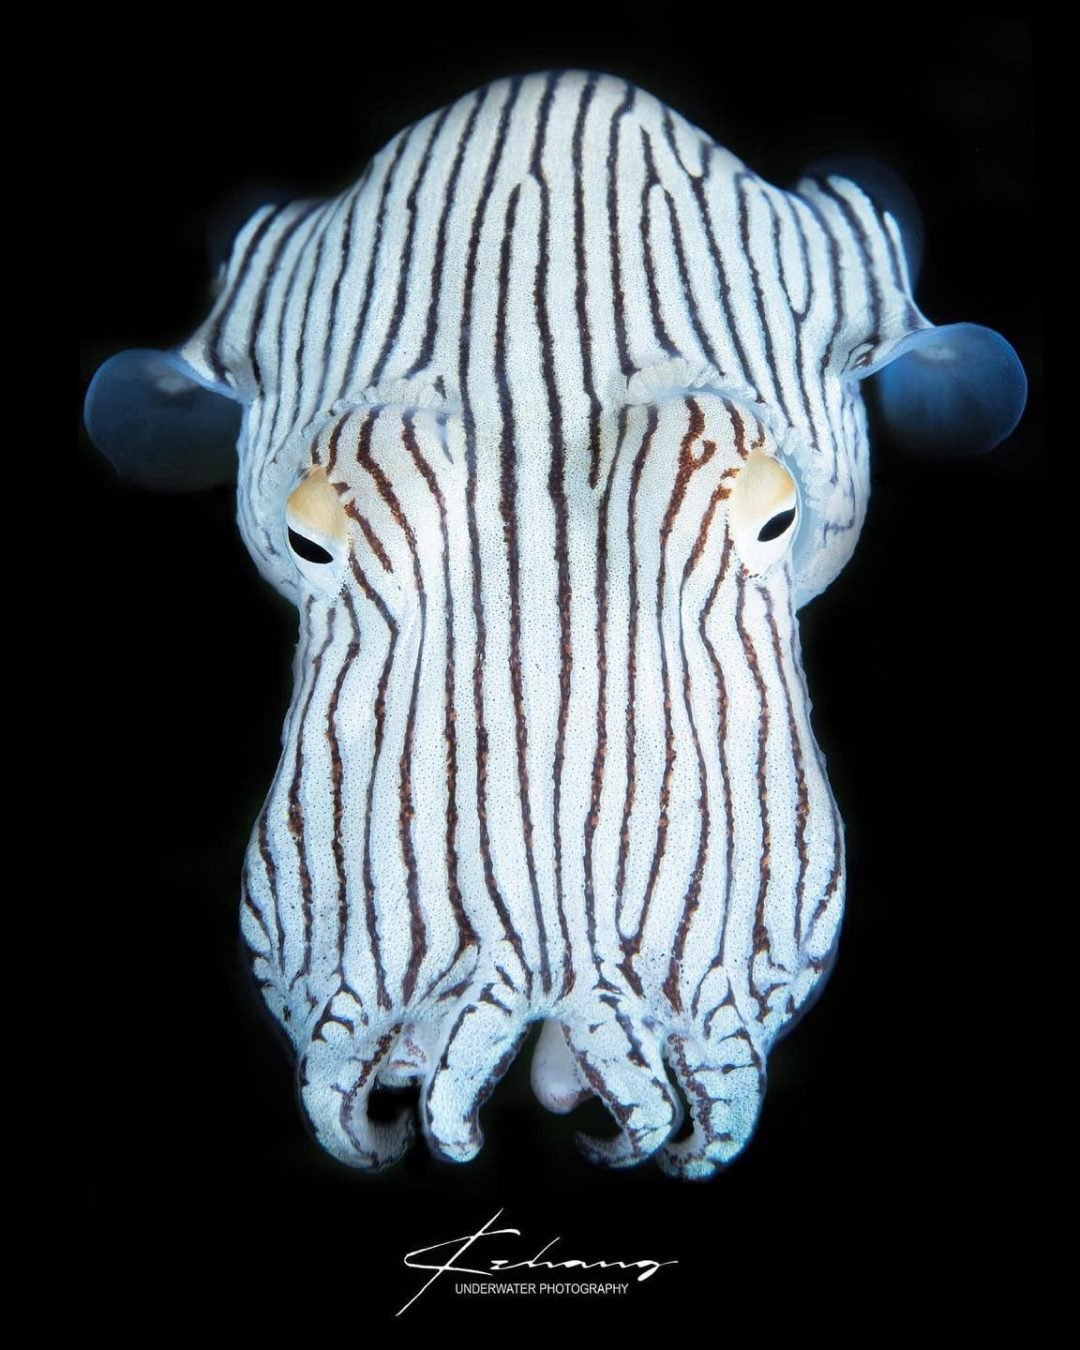 Dressed in nature's PJs: Meet the Pyjama squid &mdash; a cephalopod species decked in stunning patterns that rival any bedtime attire. 🦑✨⁠
⁠
Photo by JongGong Zhang / @k.zhang1210